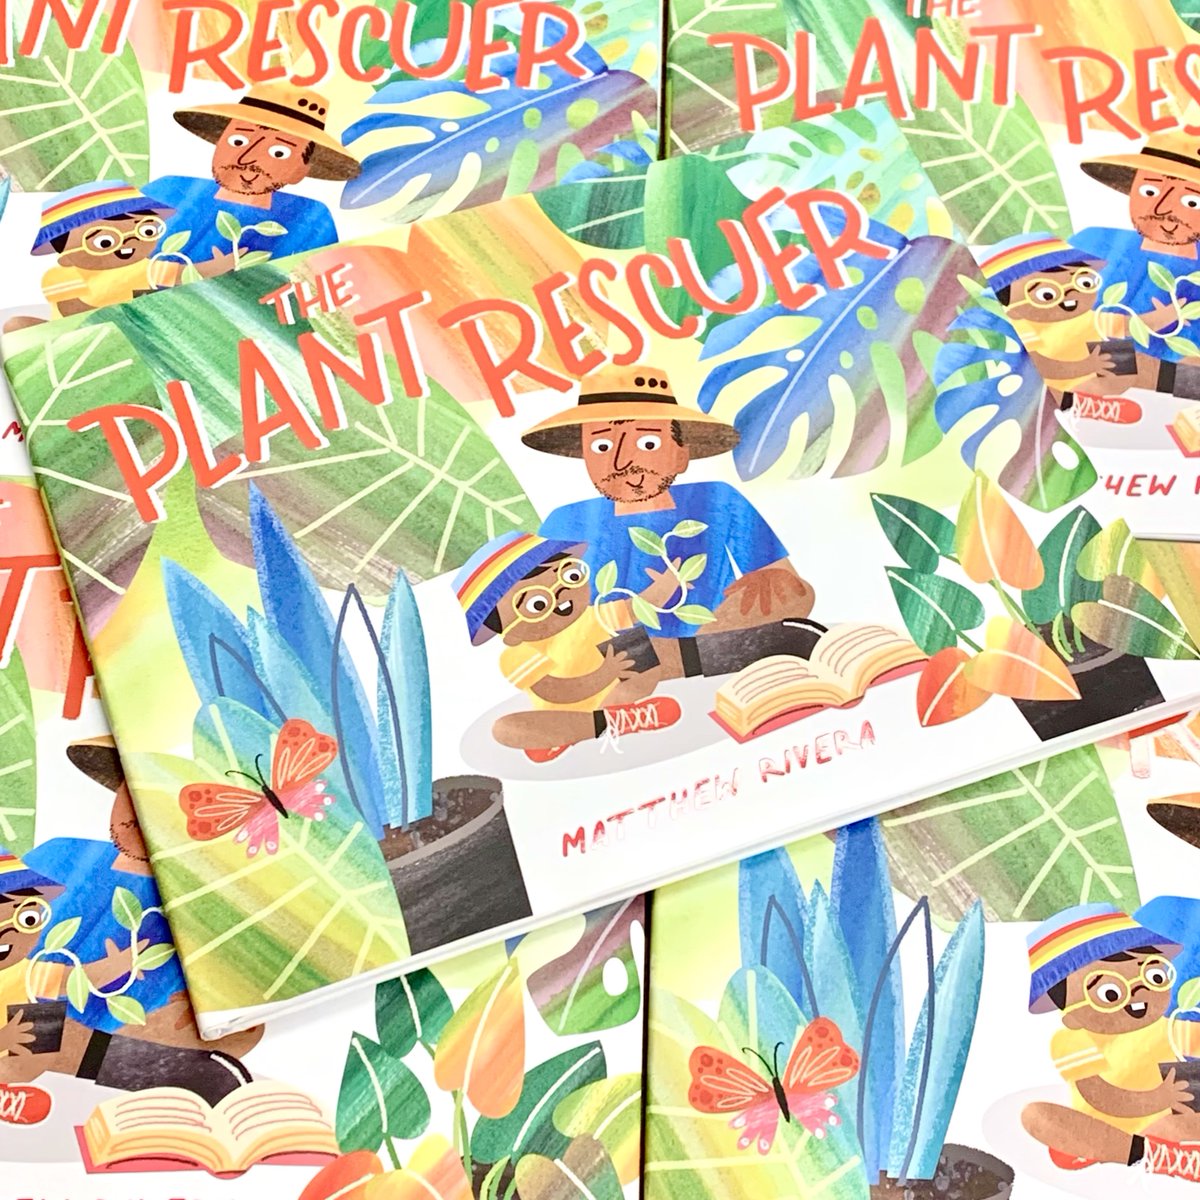 Happy book birthday to THE PLANT RESCUER! This #picturebook about caring for your first plant is on shelves today! holidayhouse.com/book/the-plant… #bookbirthday